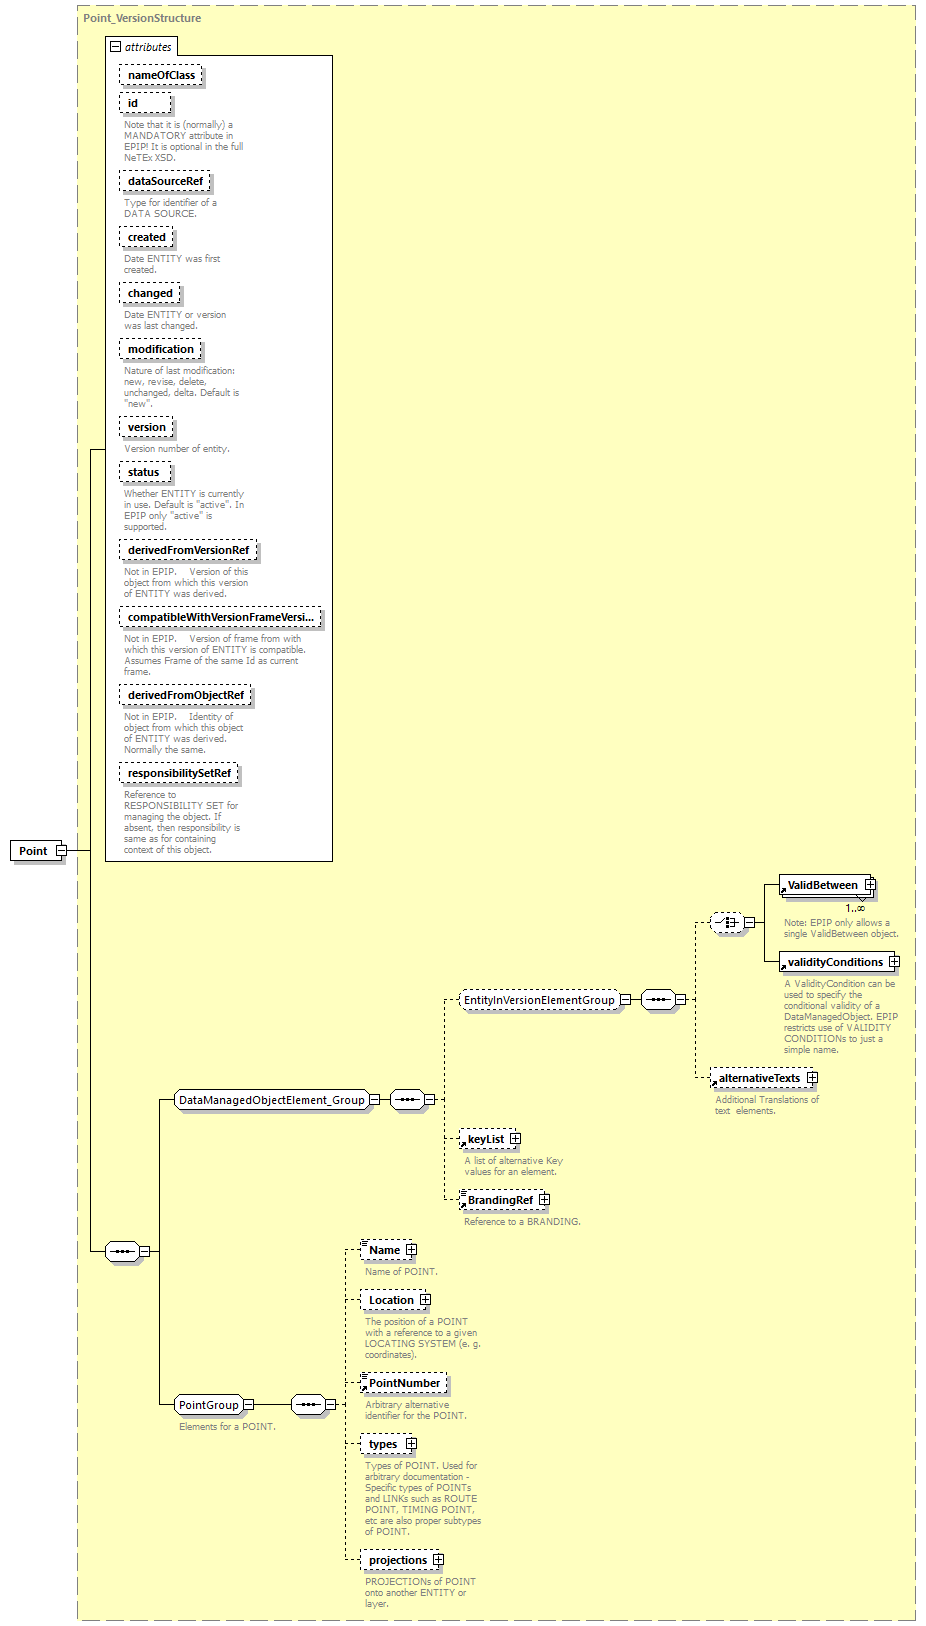 reduced_diagrams/reduced_p326.png